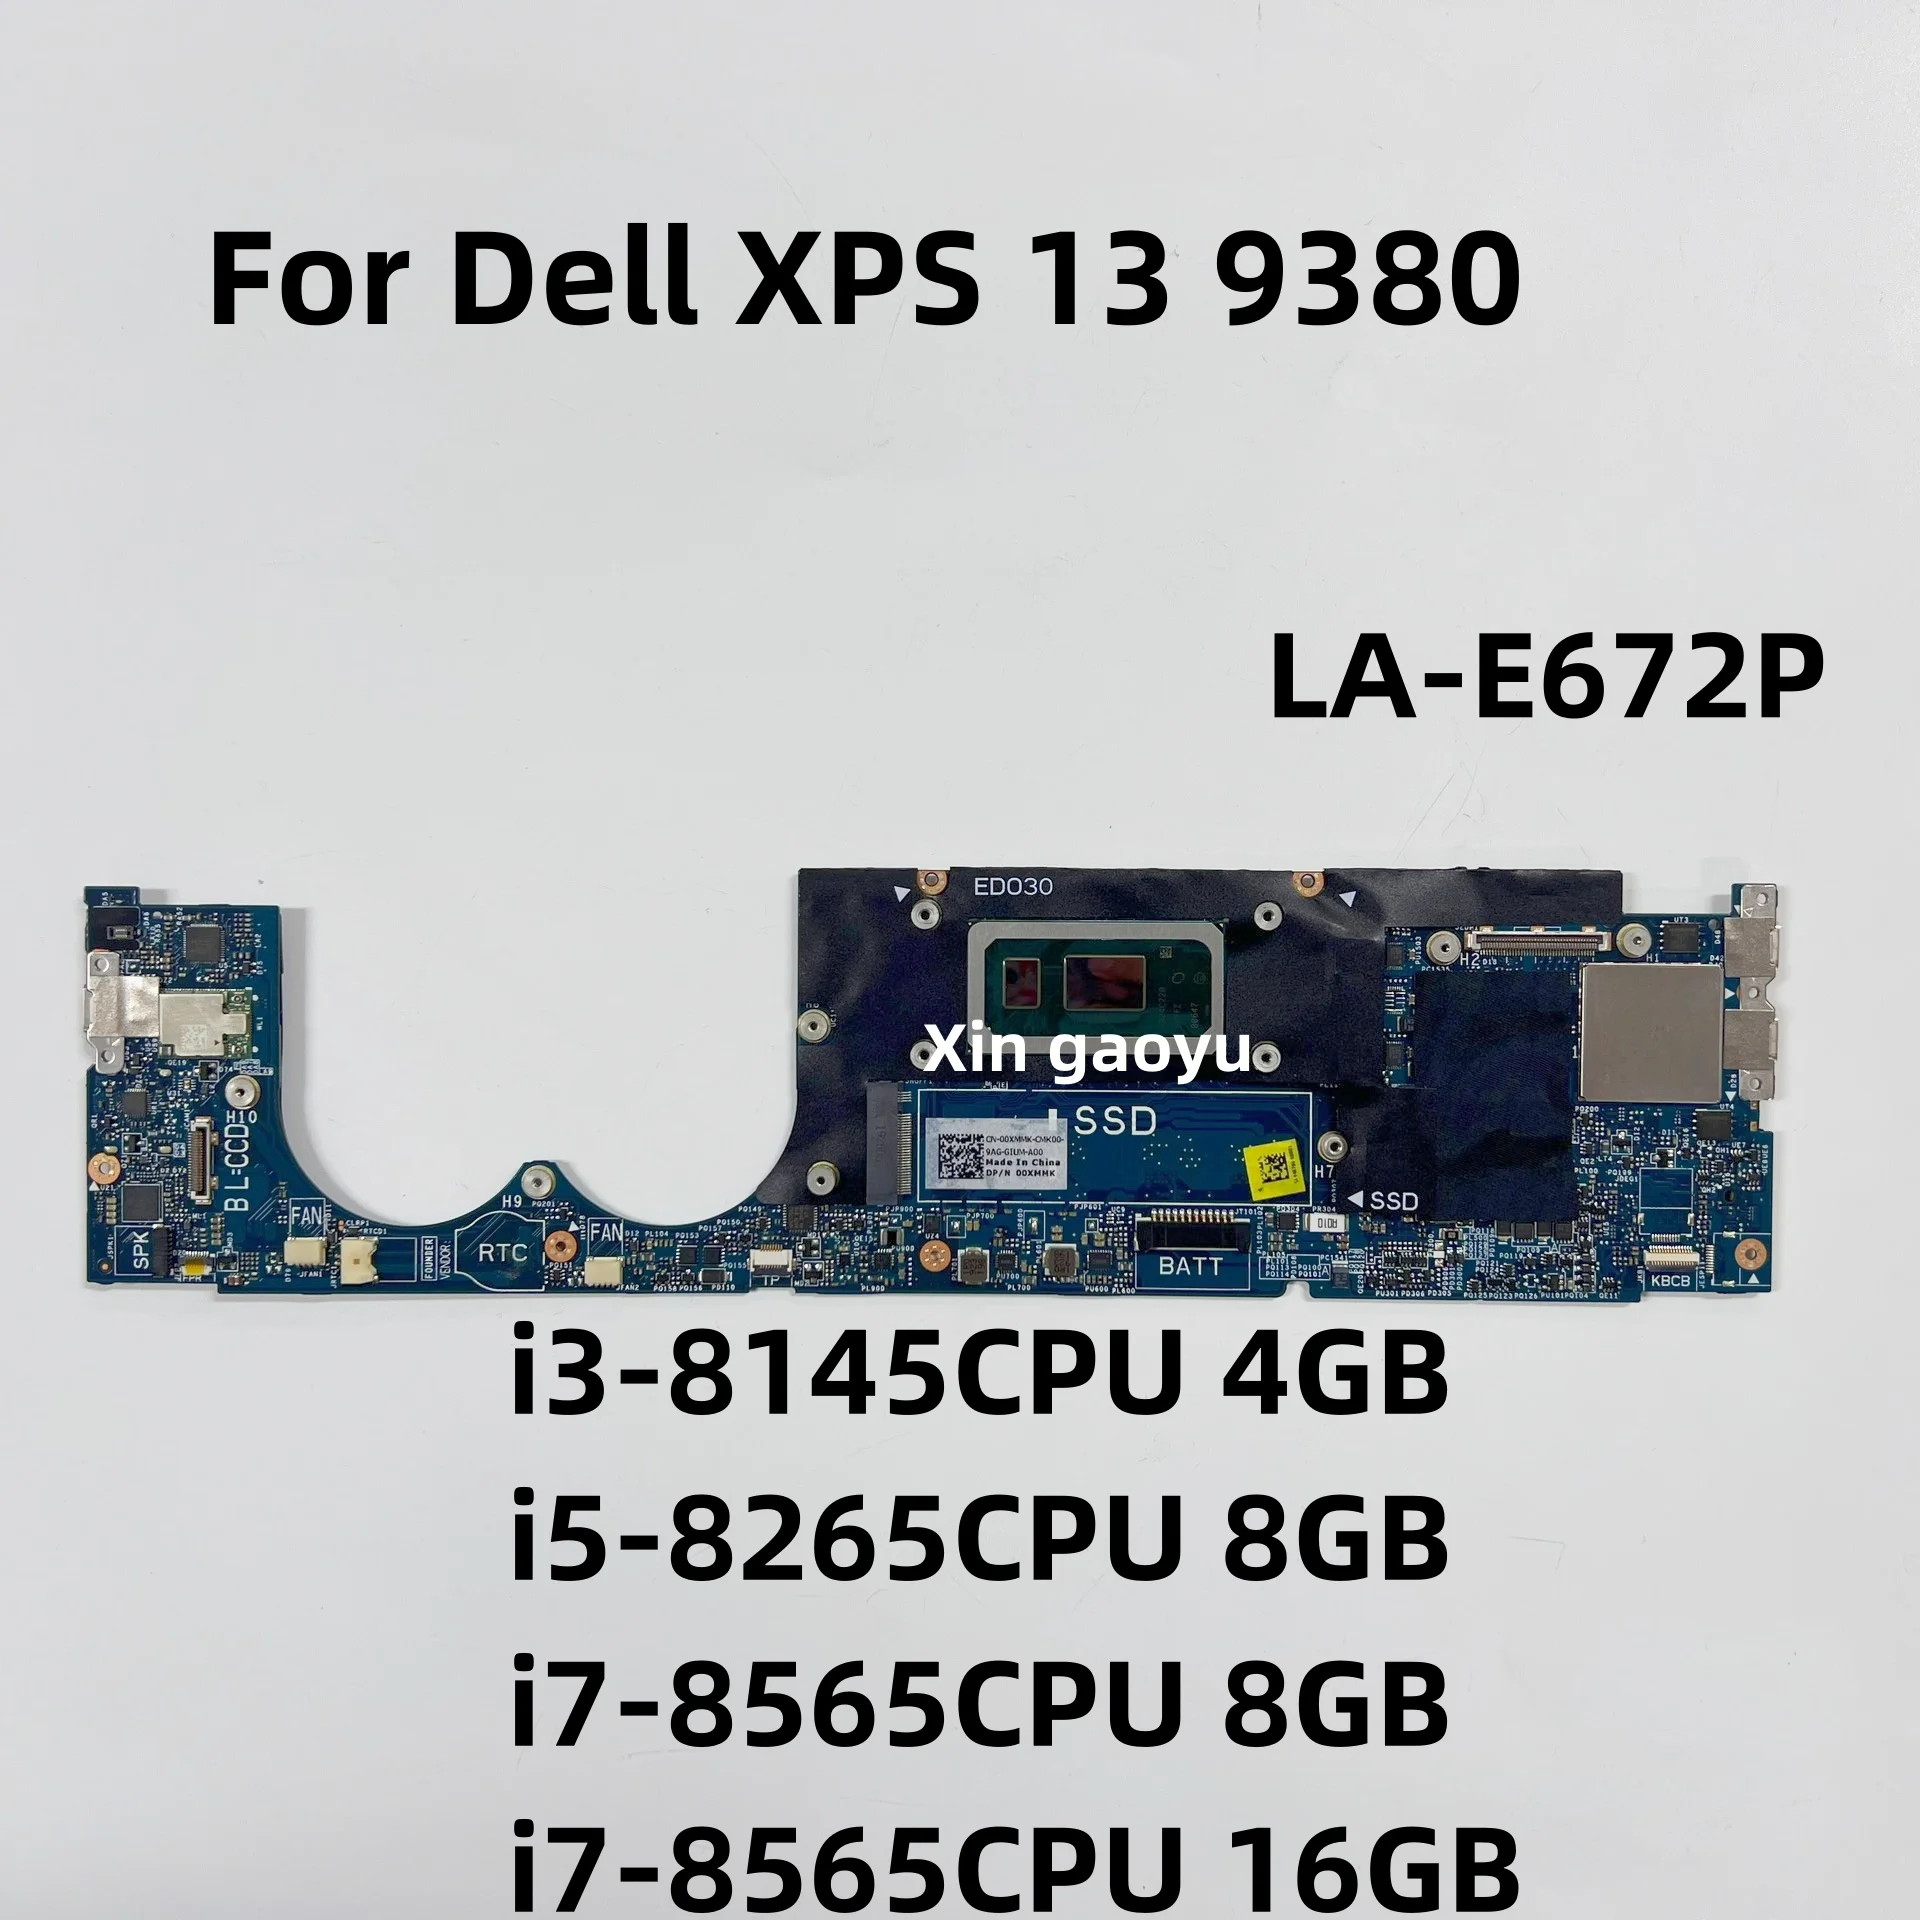 

Original LA-E672P i3 / i5 / i7 CPU 4G/8G/16G RAM Mainboard For Dell XPS 13 9380 Laptop Motherboard 100% Tested OK